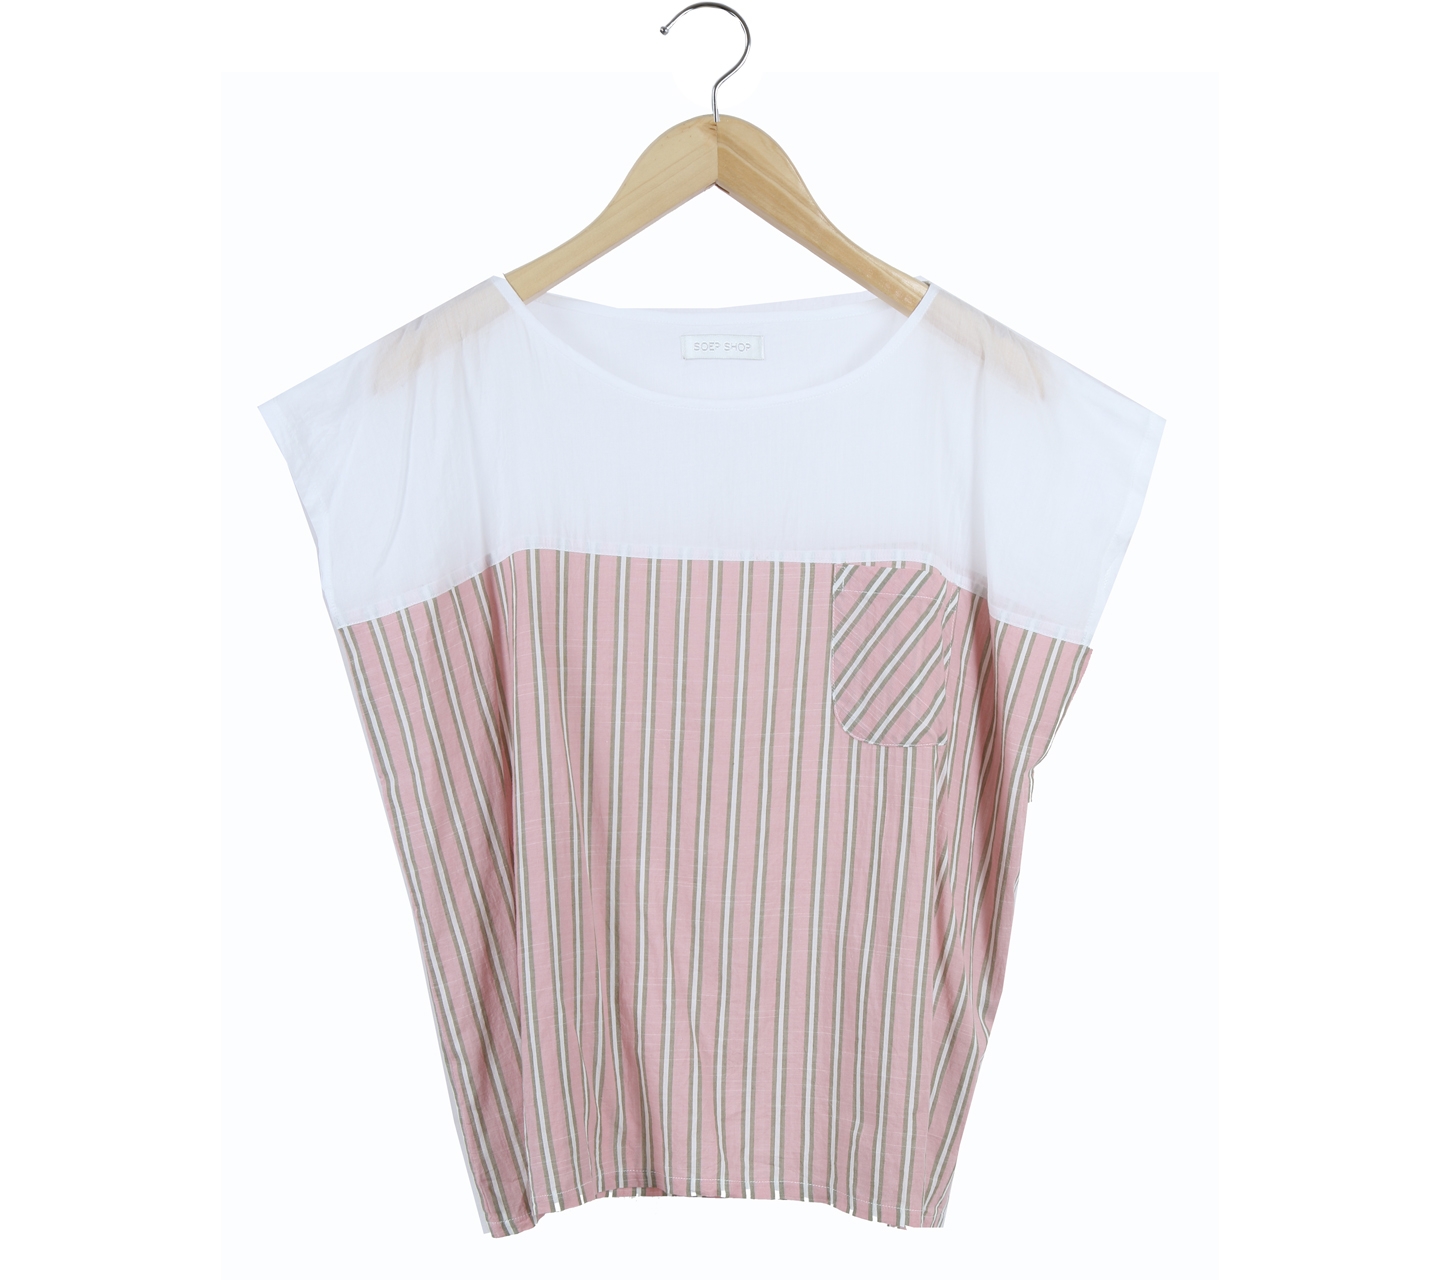 Soep Shop Off White And Pink Striped Sleeveless